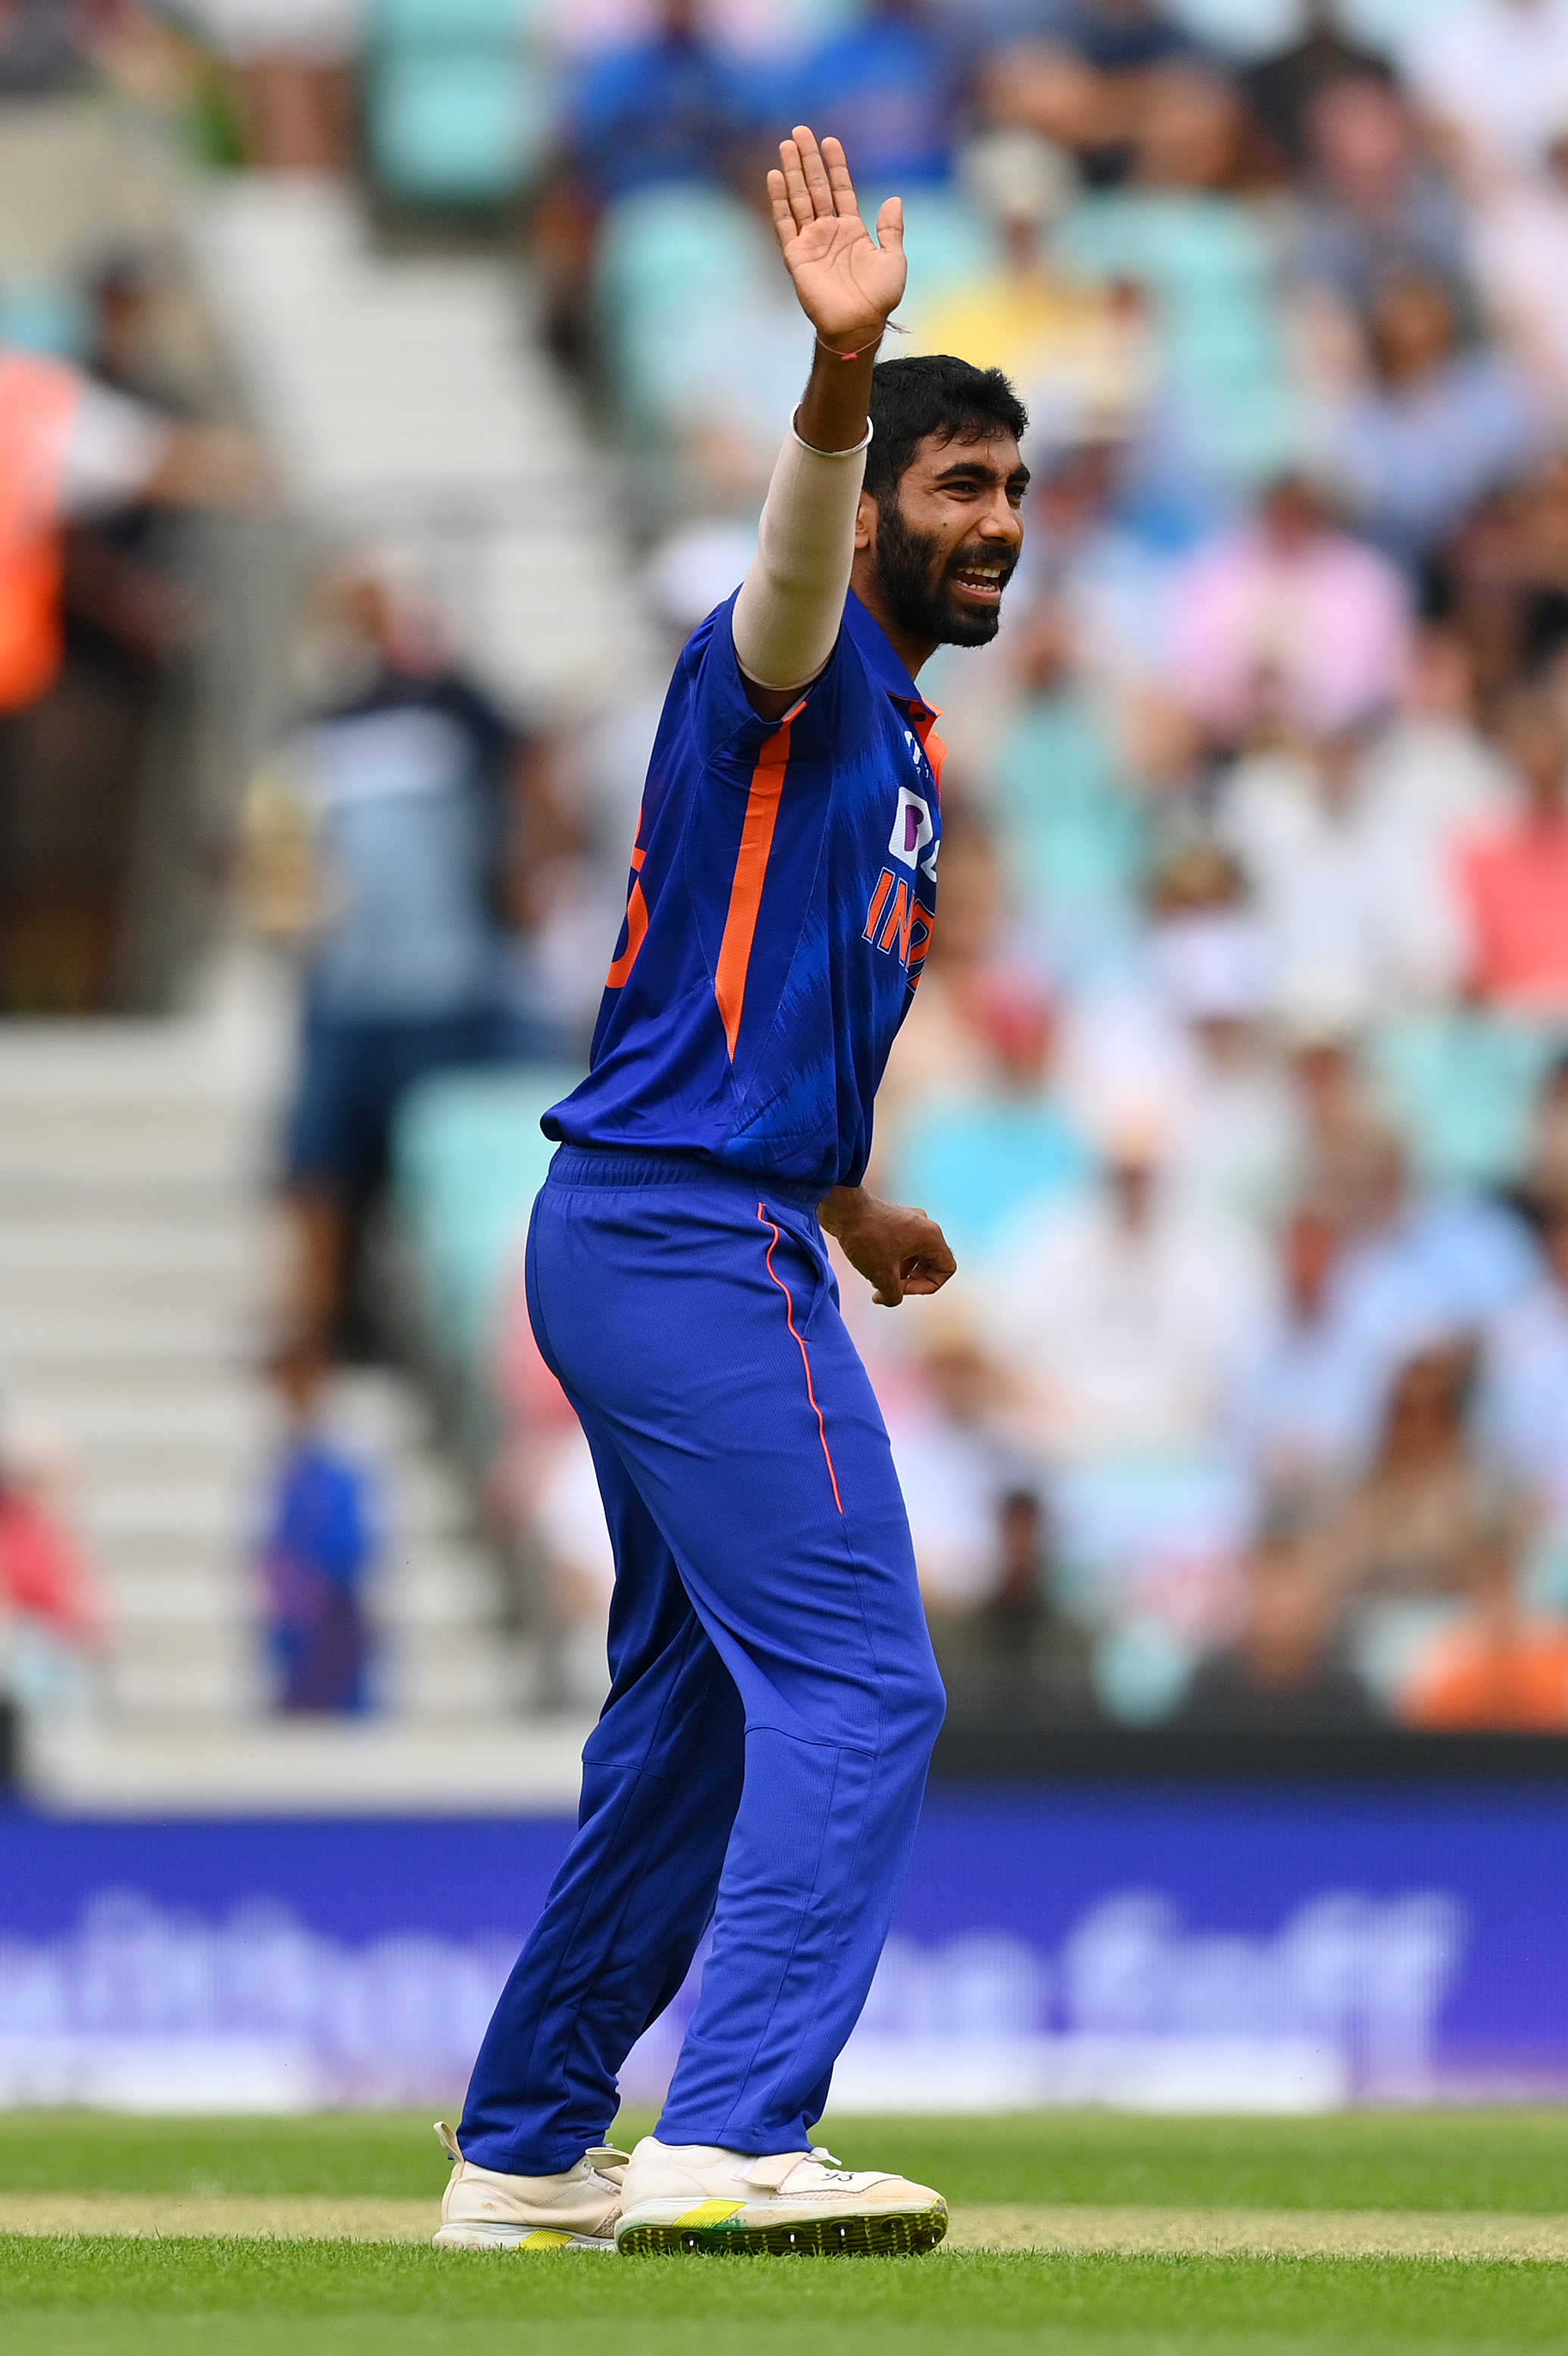 ENG vs IND 2022 | Jasprit Bumrah best all-format bowler by a country mile, asserts Michael Vaughan